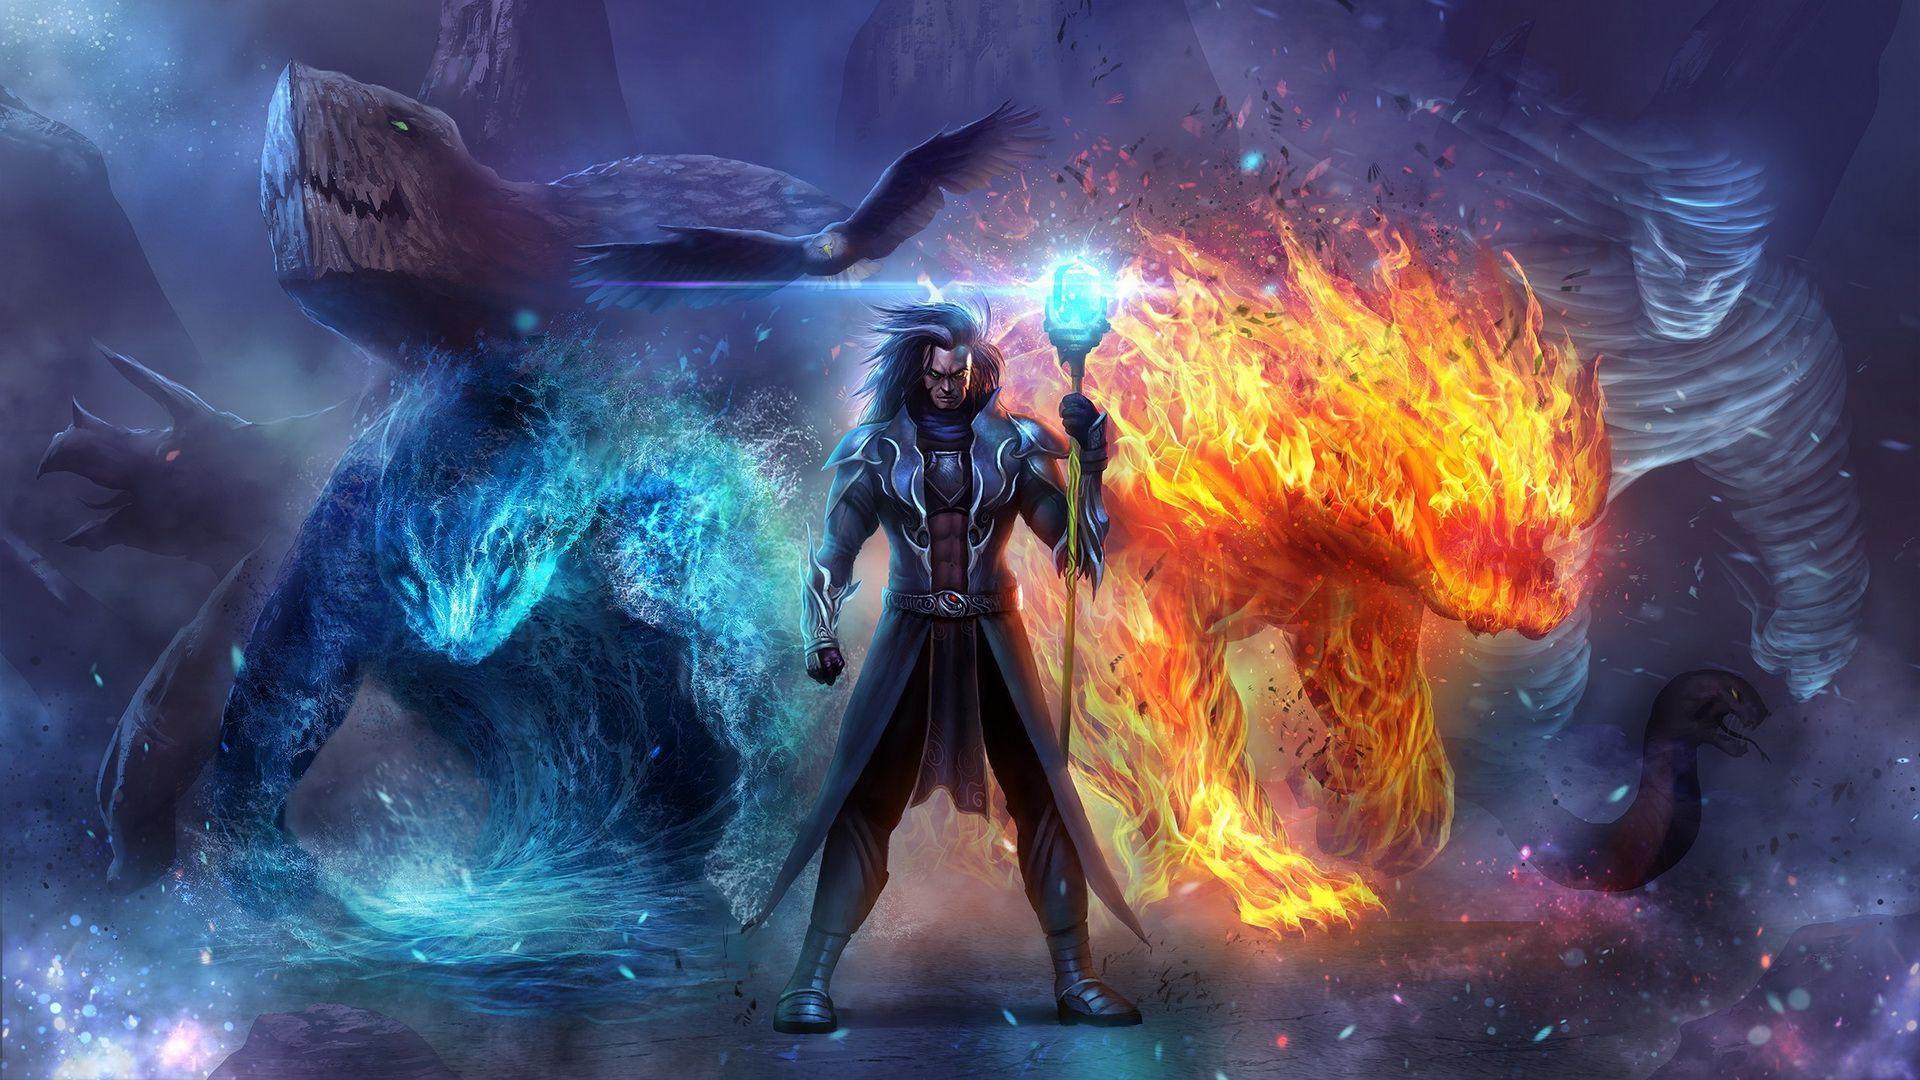 Hd Wizard In Ice And Fire Wallpaper .teahub.io